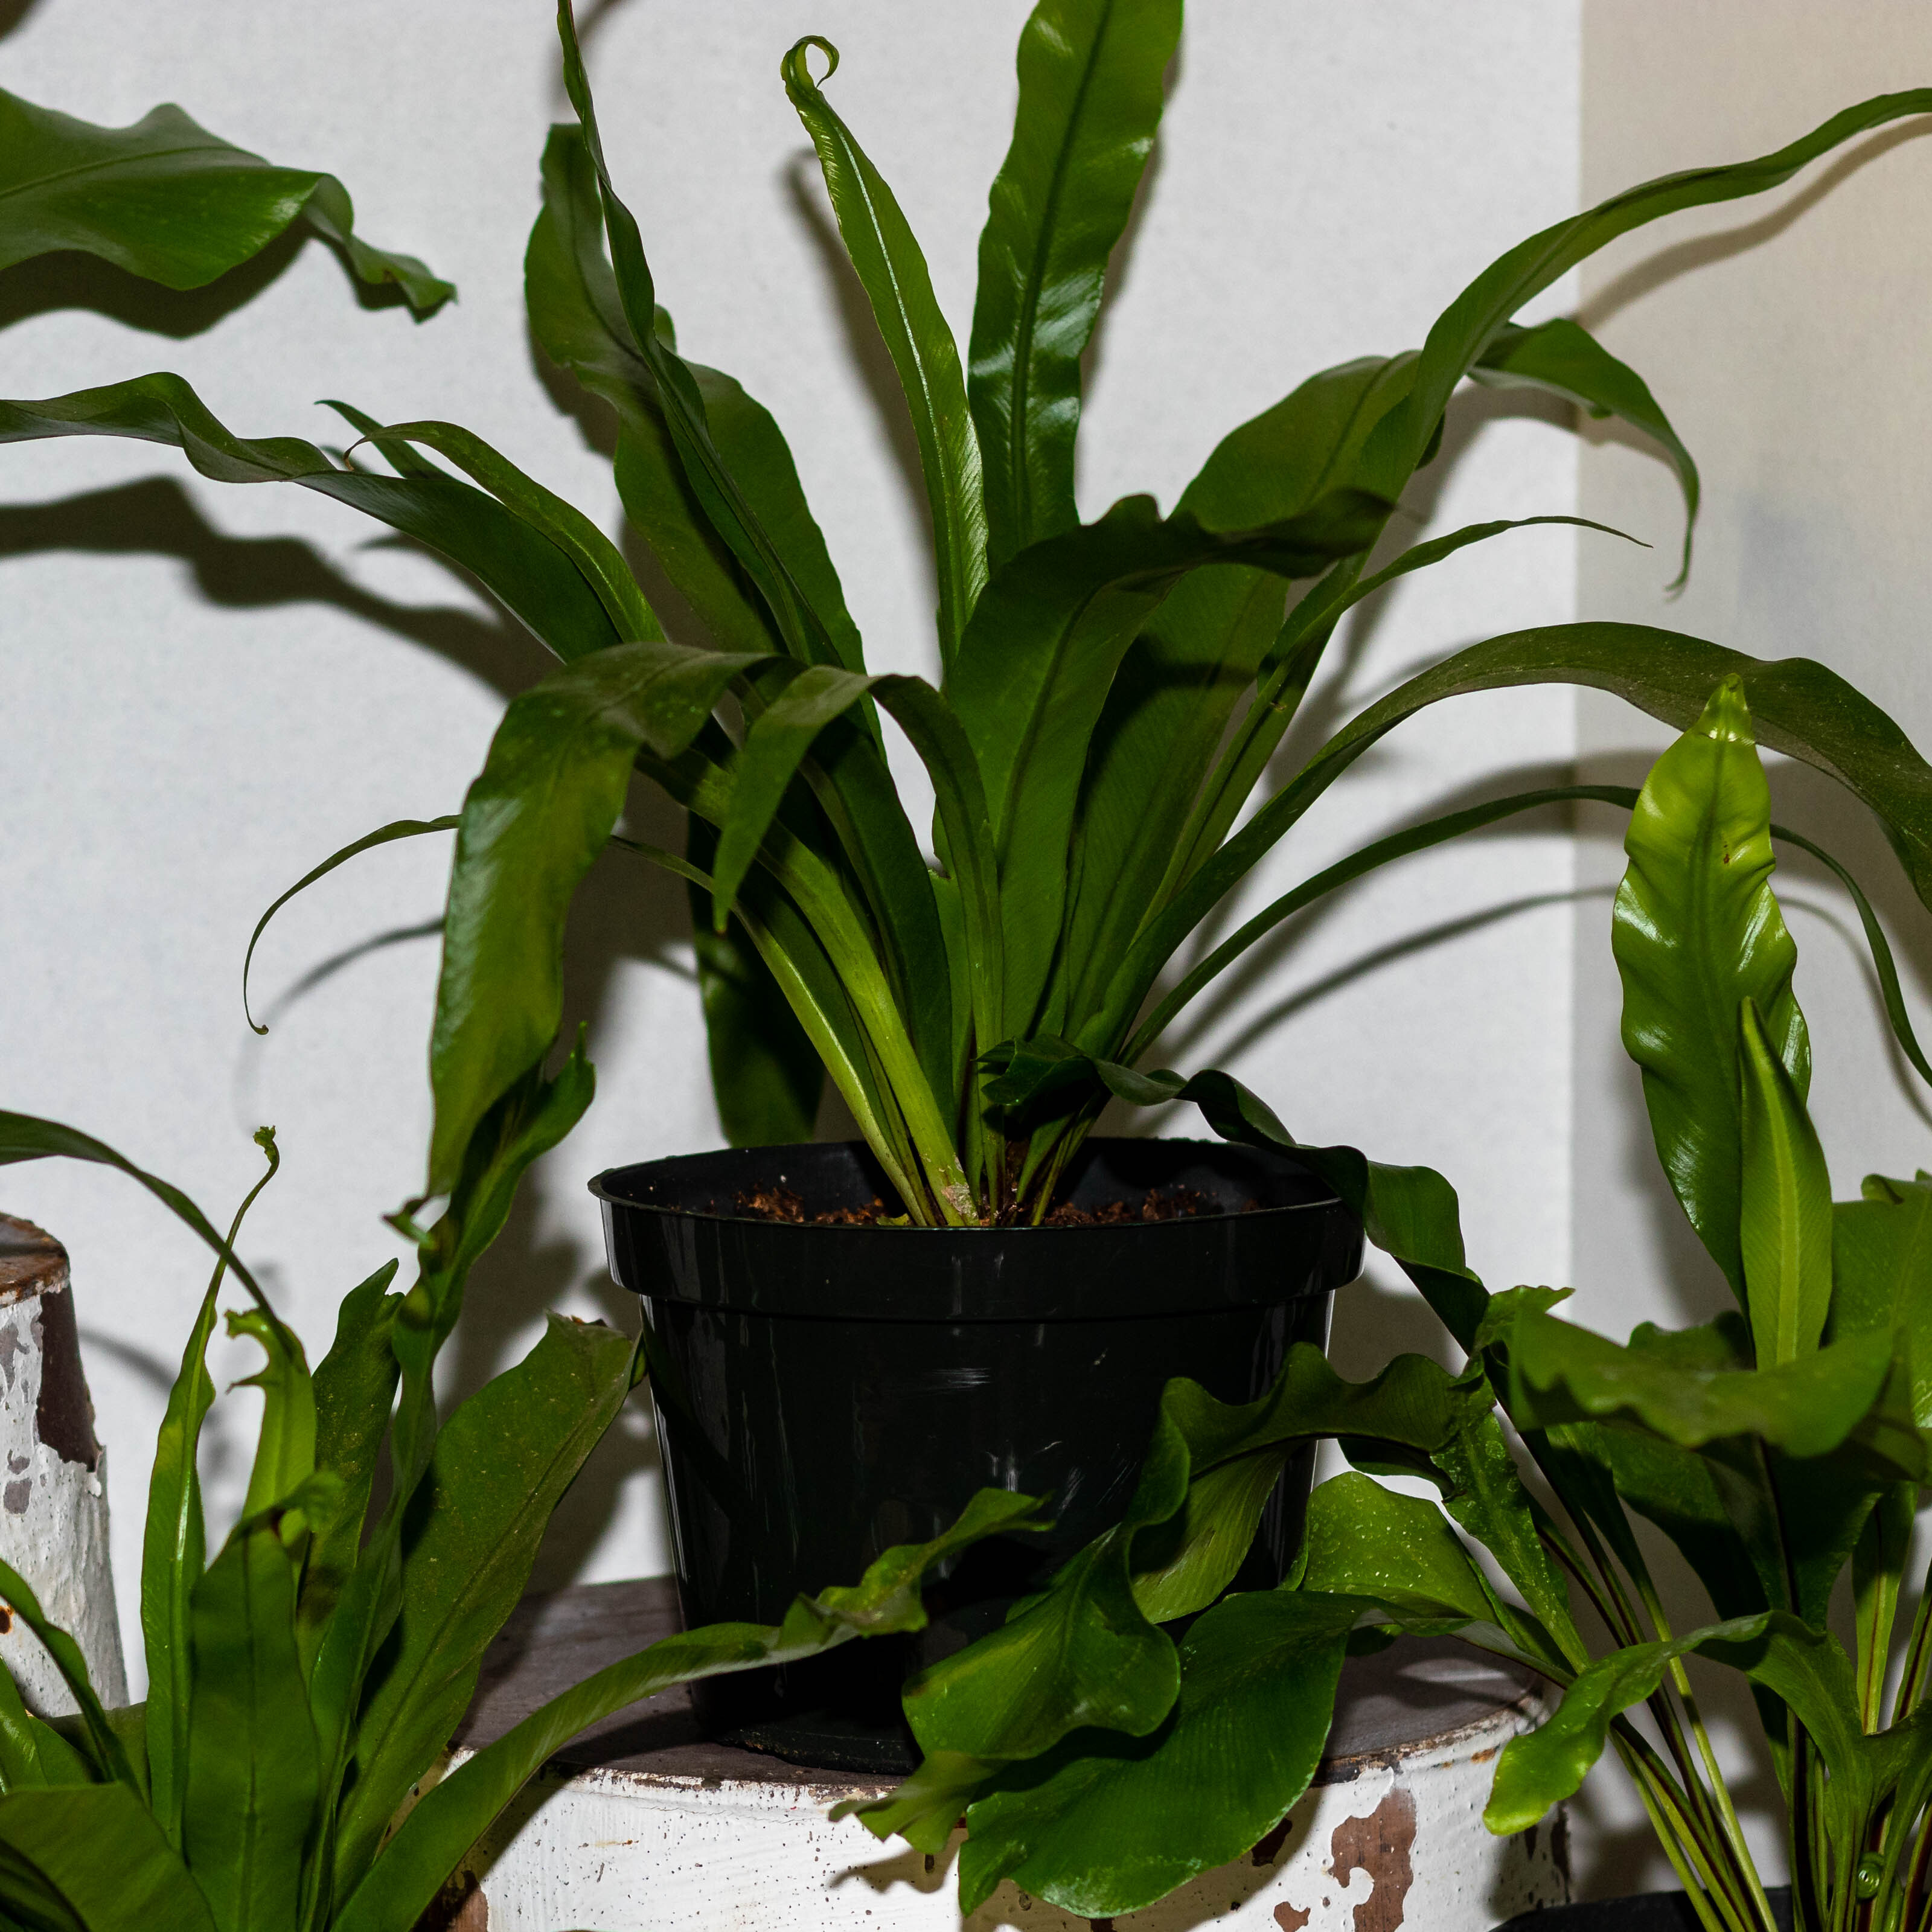 
  			<h4>A Classic - The Birds’ Nest Fern (Asplenium nidus)</h4>
      		<p>If ferns are something you’re interested in, this is one of the easiest ferns to start with. Birds' nest ferns are happy in low light. They can dry out about half-way in between waterings during the growing season; check it once every one to two weeks. In the winter, water less frequently but make sure it doesn’t sit too dry for too long. Make sure you don’t water in the center of the plant, but around the base.
      		</p>
      		